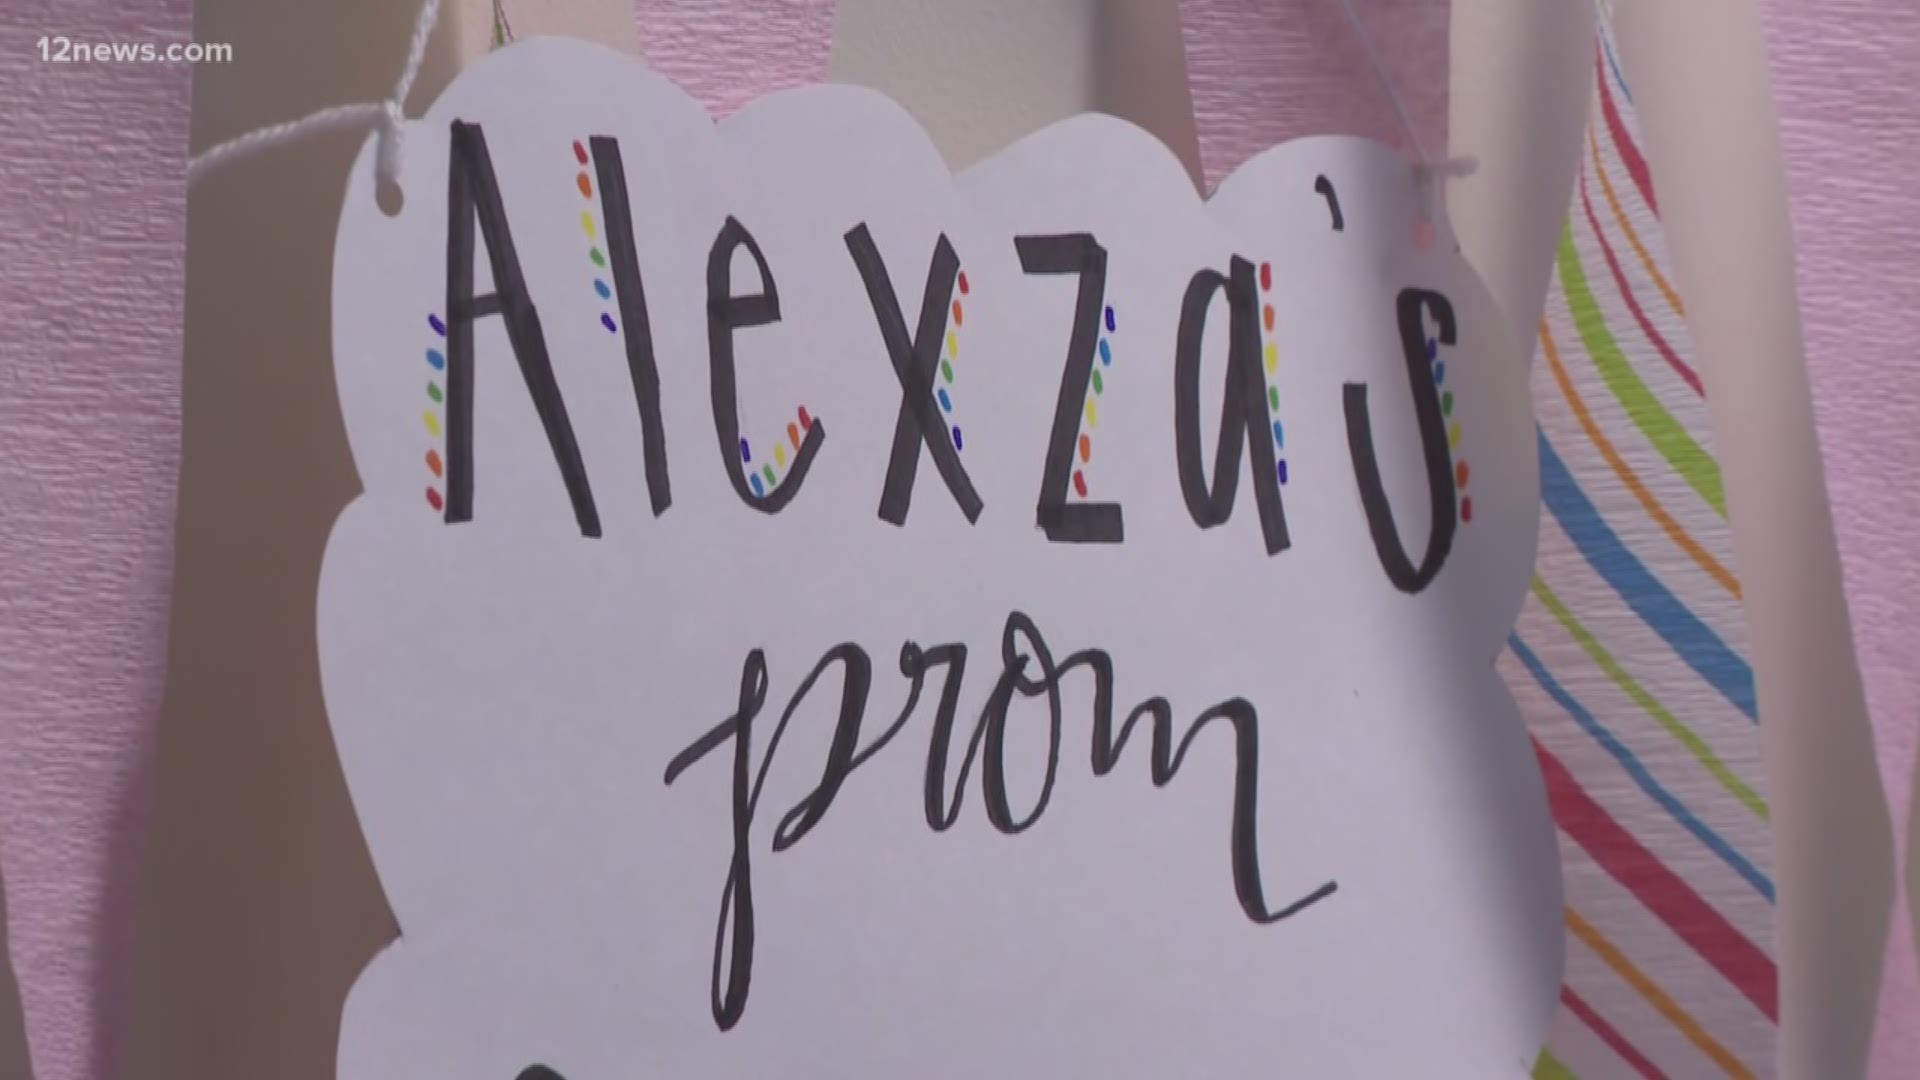 Alexza Cornejo was forced to miss her senior prom because of an emergency procedure. So, hospital staff brought prom to her.